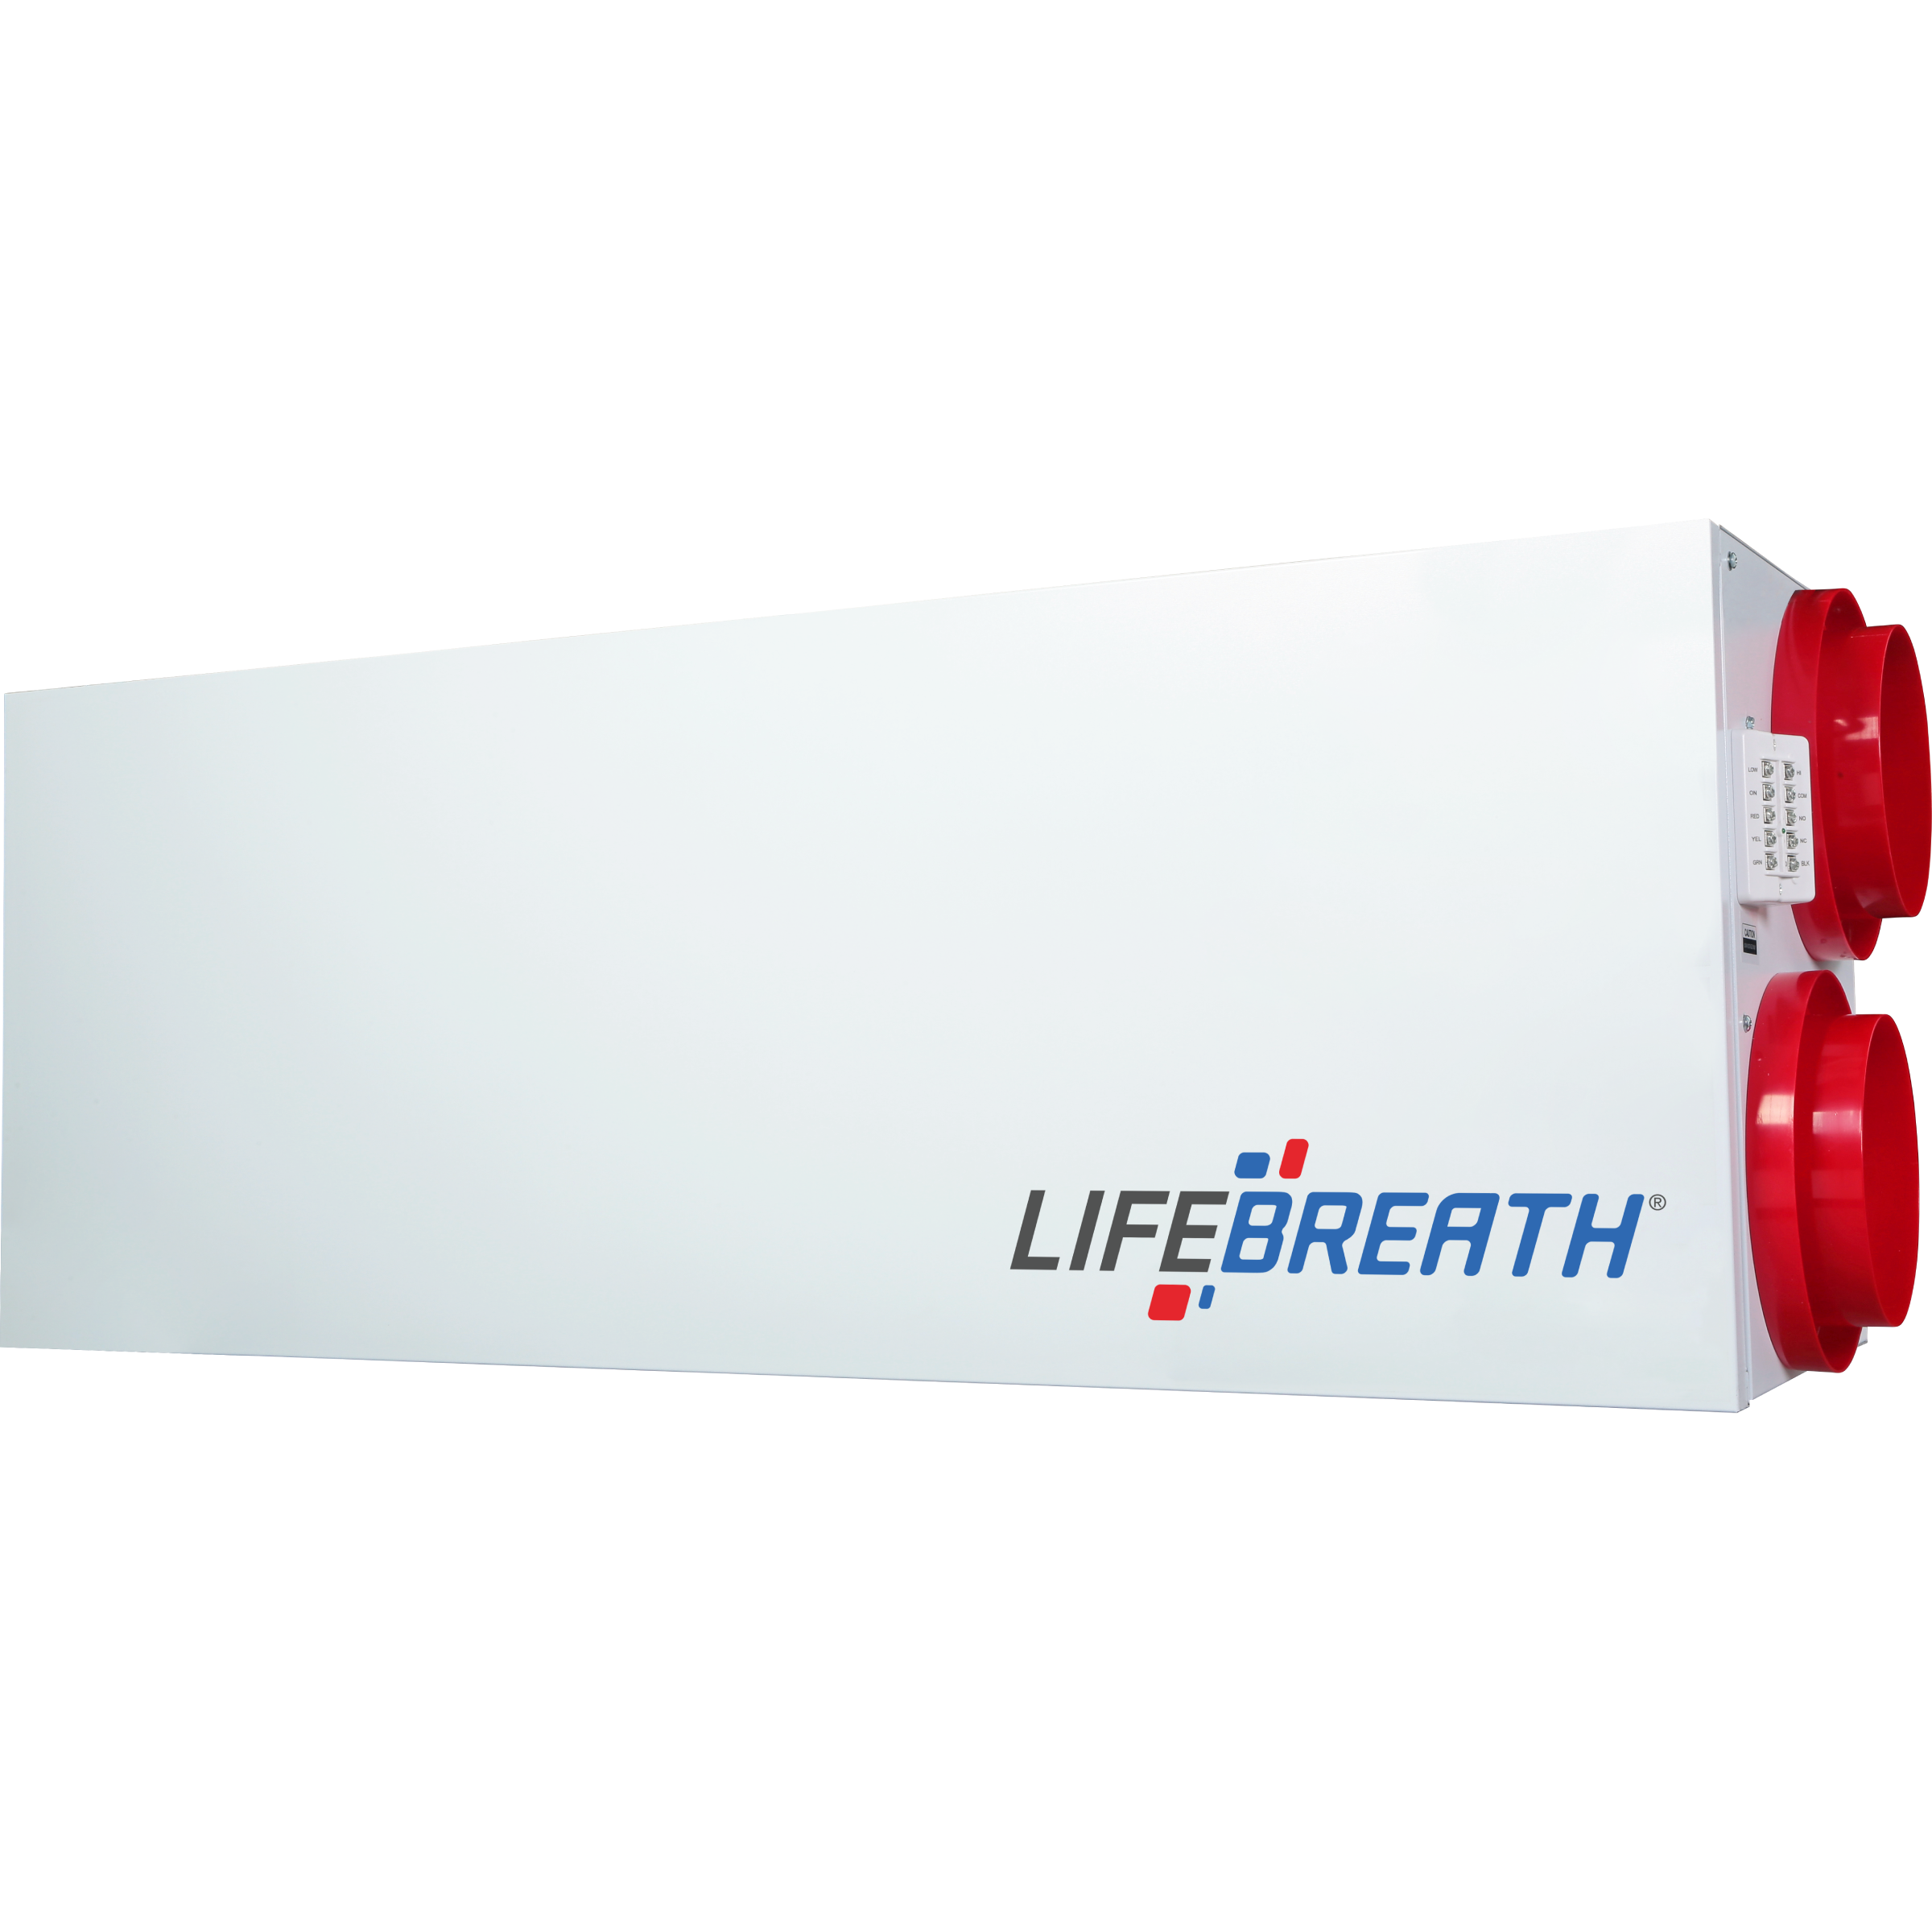 195DCS Lifebreath Residential Heat Recovery Ventilator (HRV), 158 CFM, 120 V, Frequency 60 Hz - Control Included